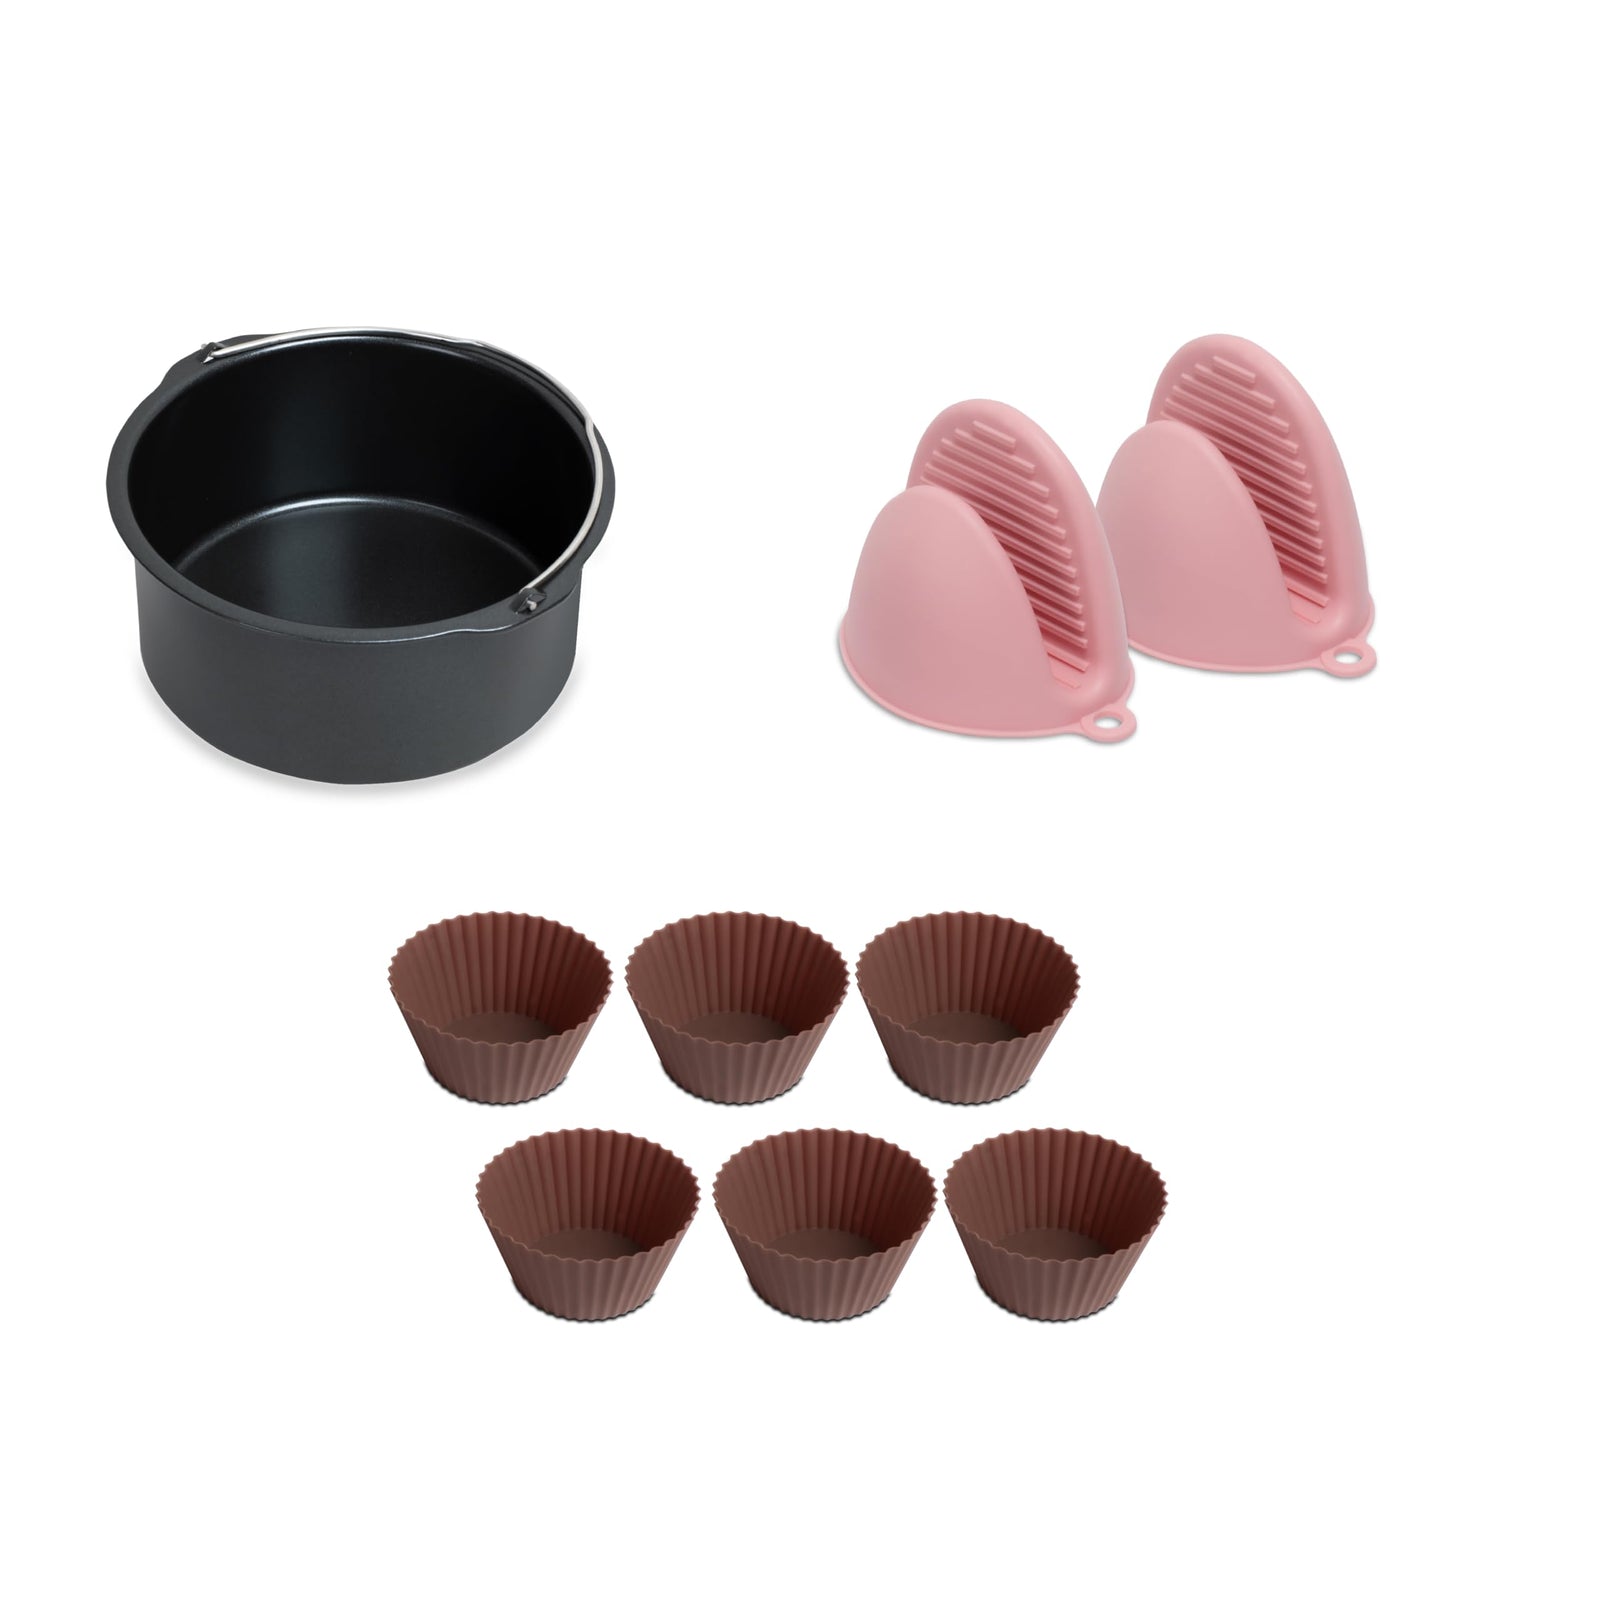 Philips Airfryer Home Baking Accessory Kit with Baking Pan, Muffin Cups and Hand Mitts, HD9810/01, Compatible with Large Airfryer